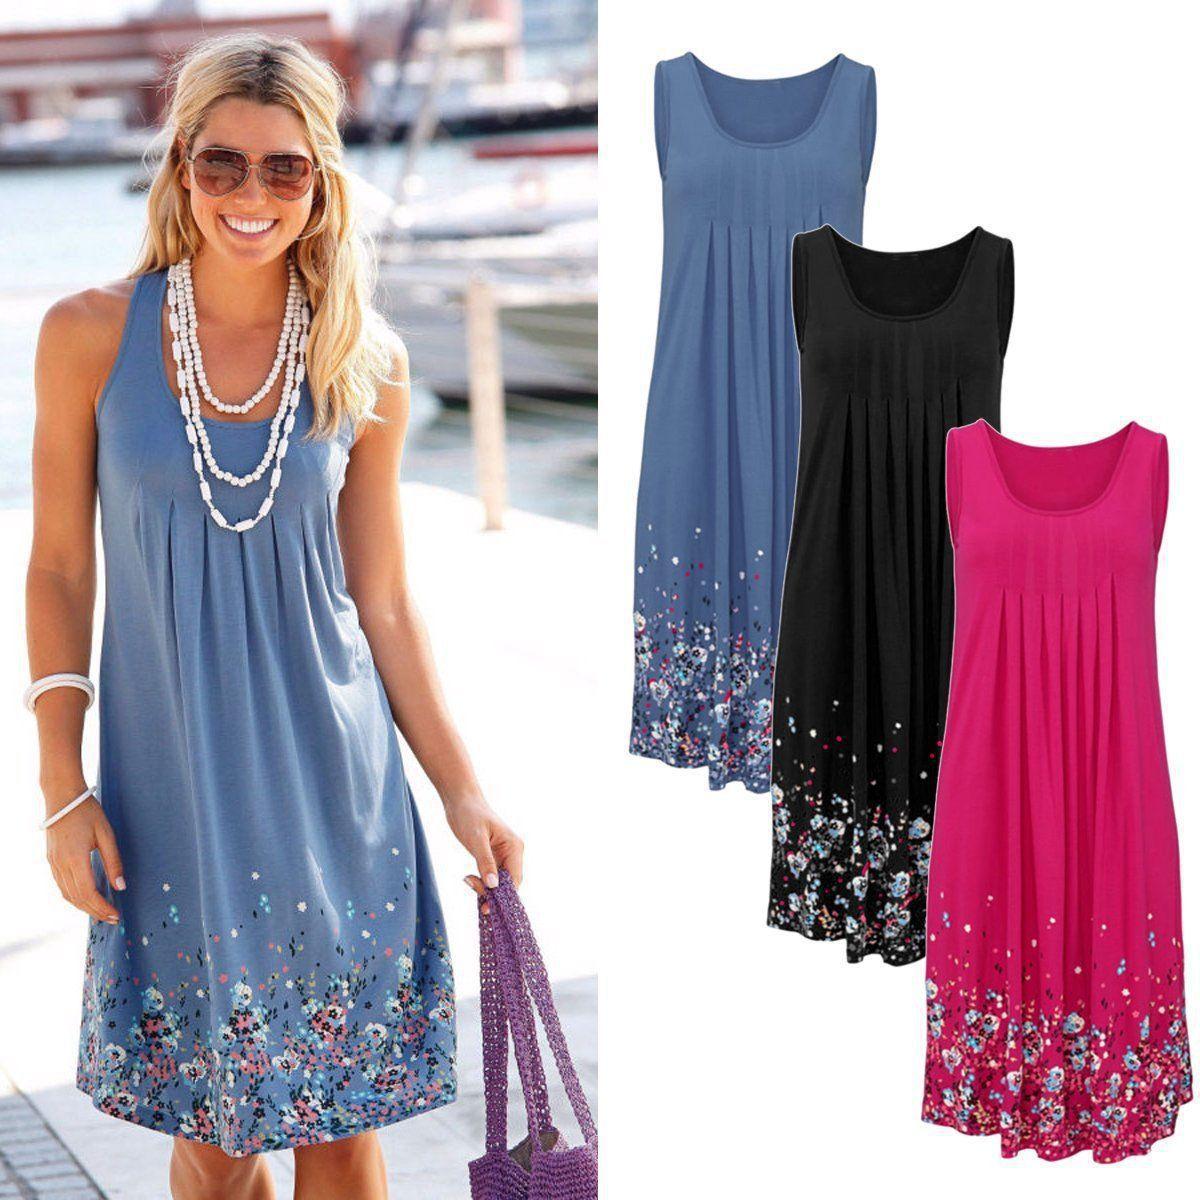 Dress Women Summer Casual Party Floral Printing Sleeveless Beach